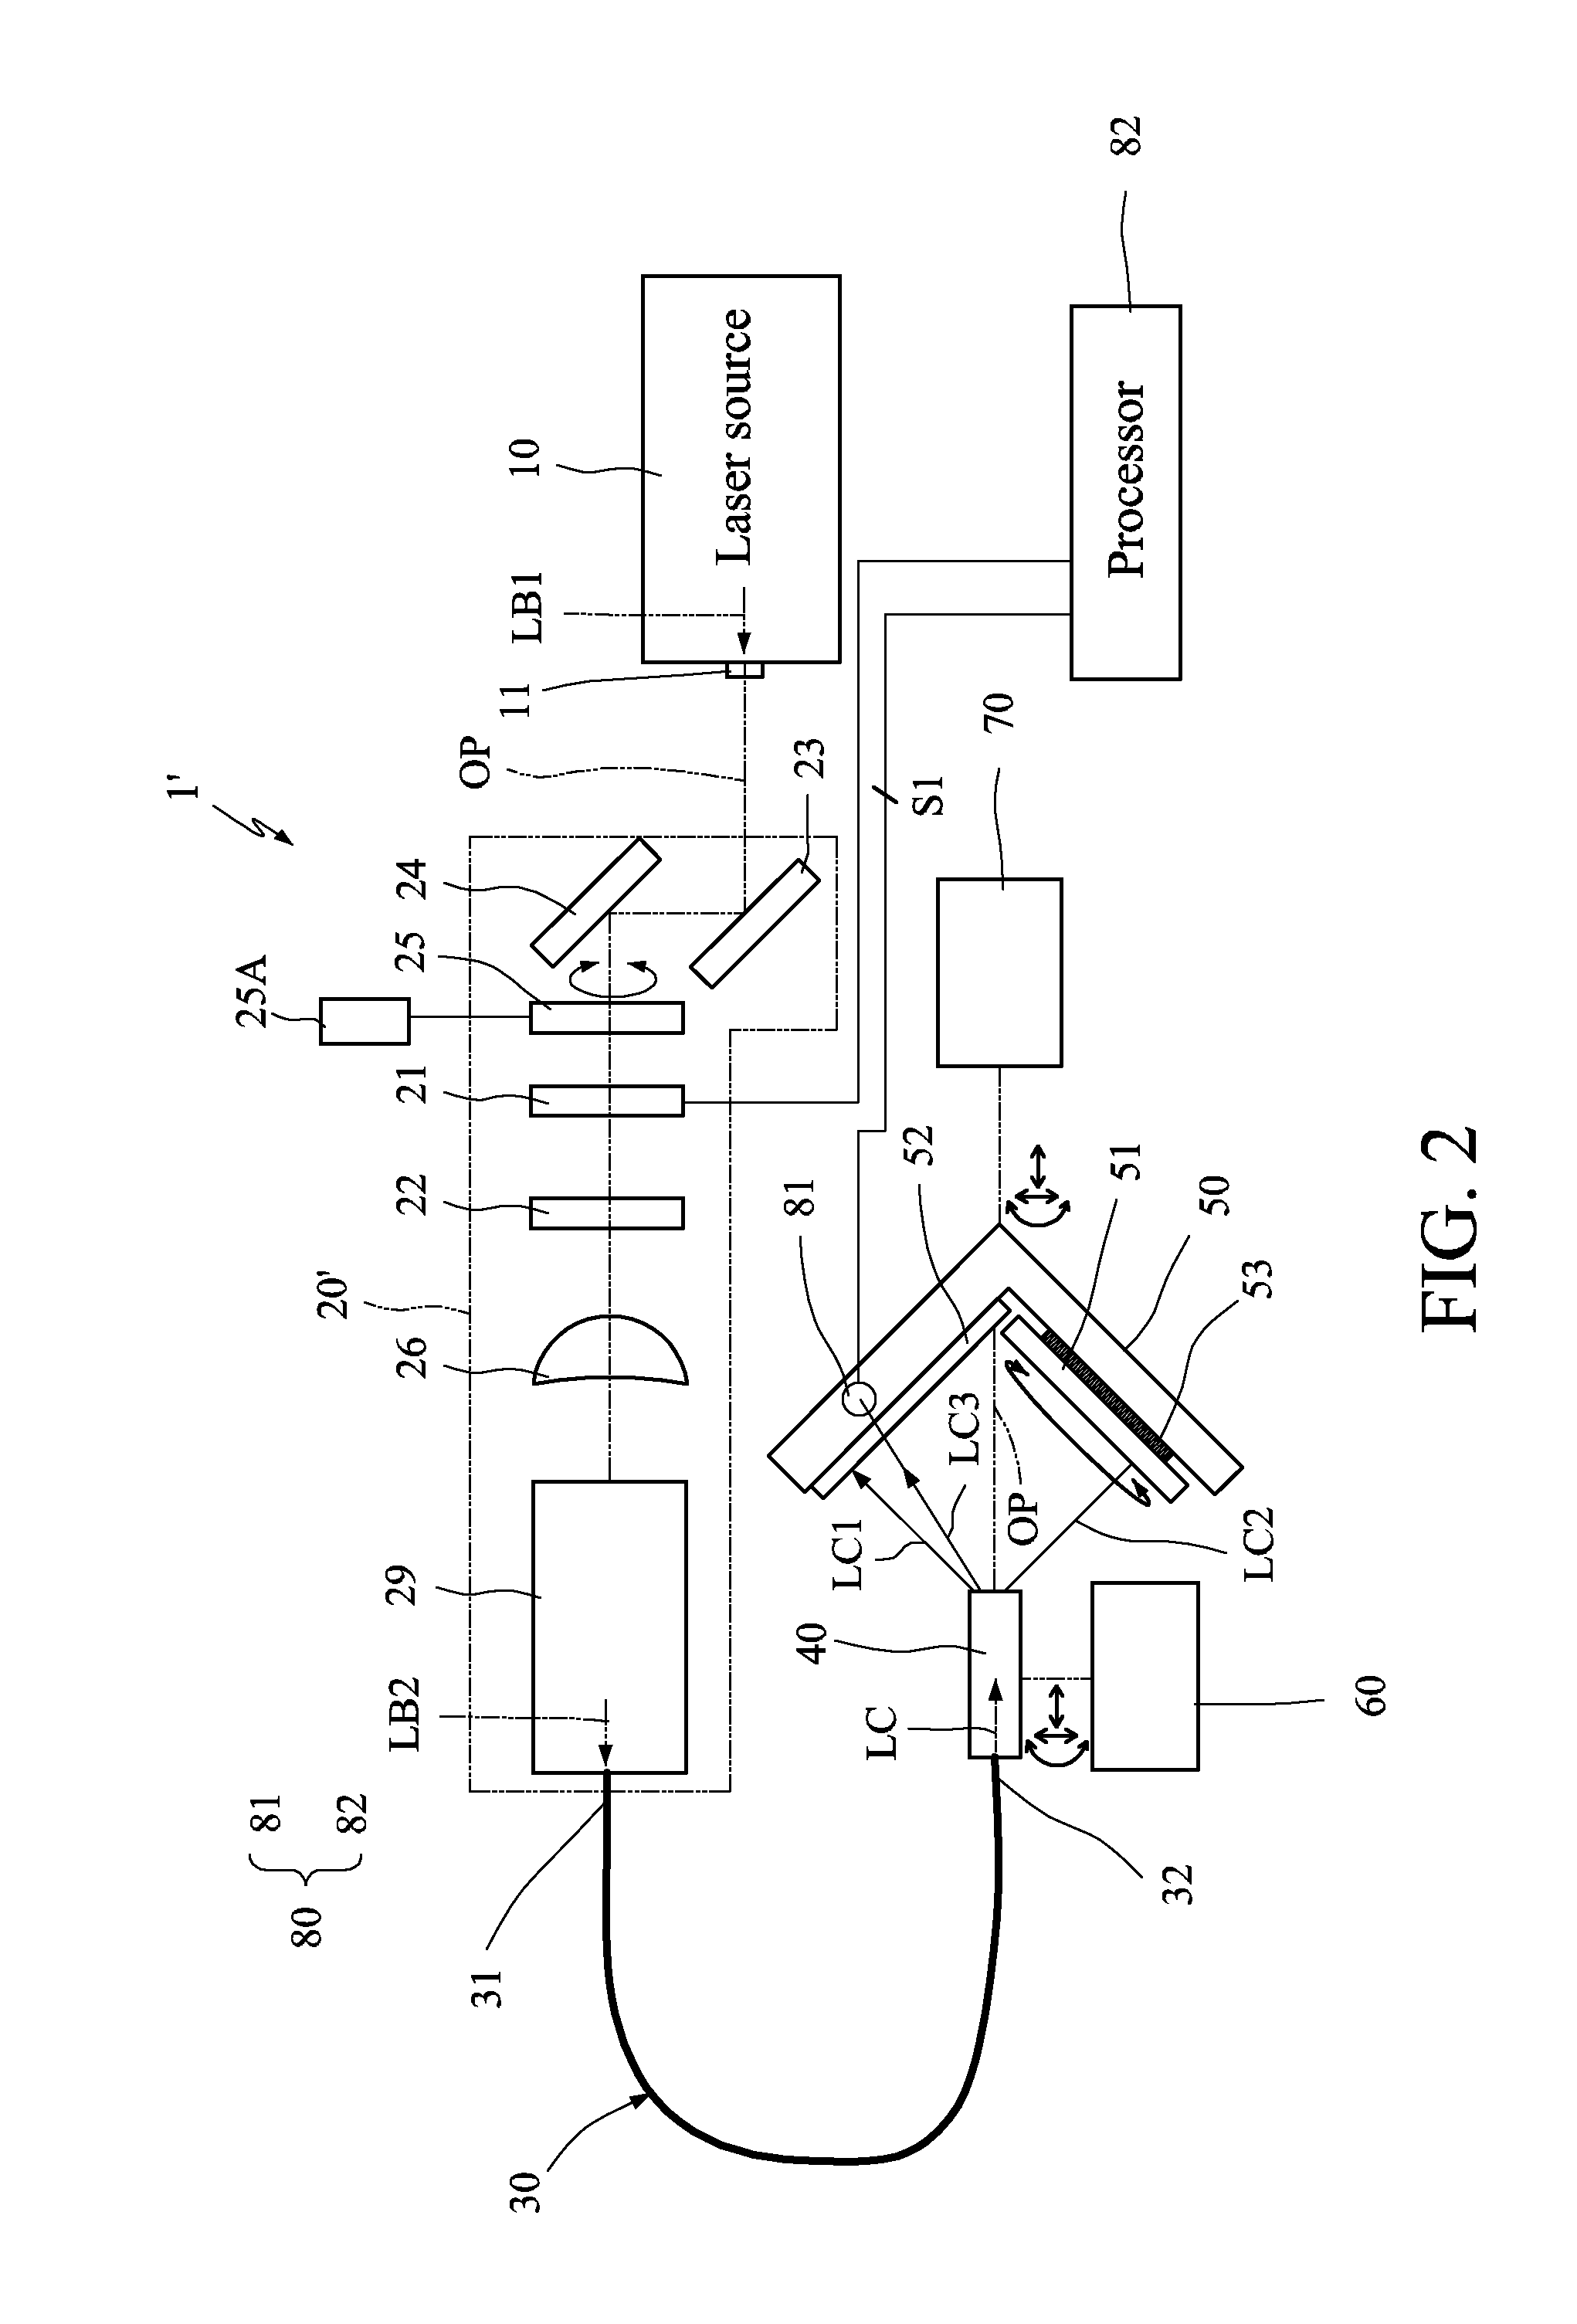 Laser Interference Lithography Apparatus Using Fiber as Spatial Filter and Beam Expander